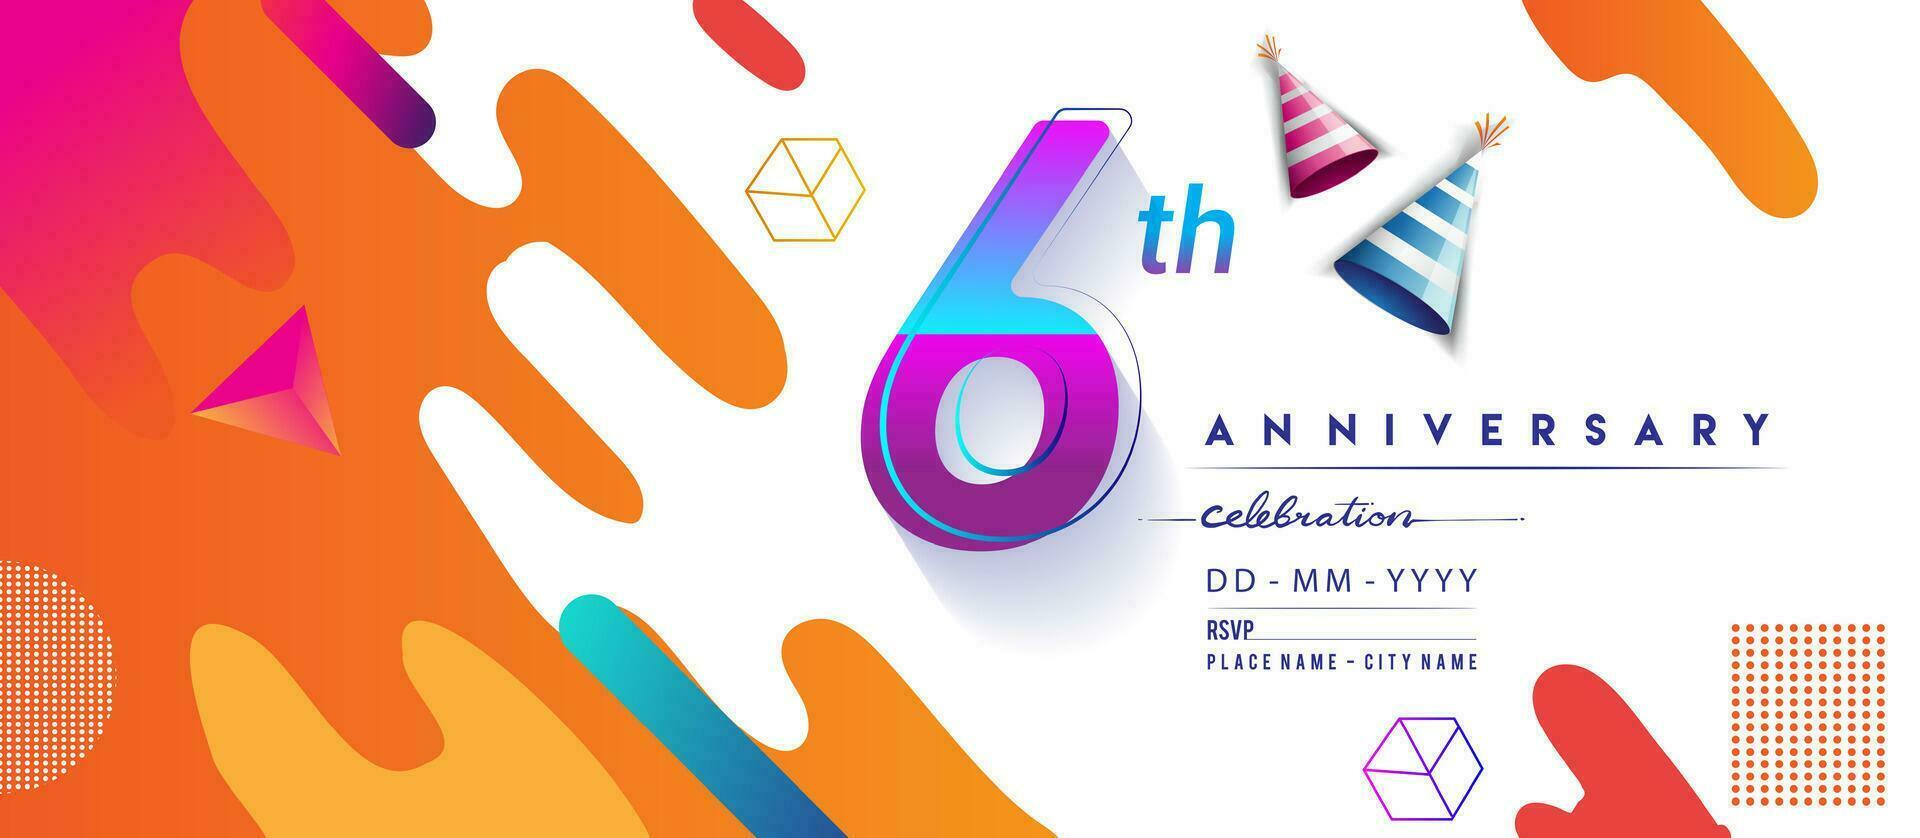 6th years anniversary logo, vector design birthday celebration with colorful geometric background and circles shape.